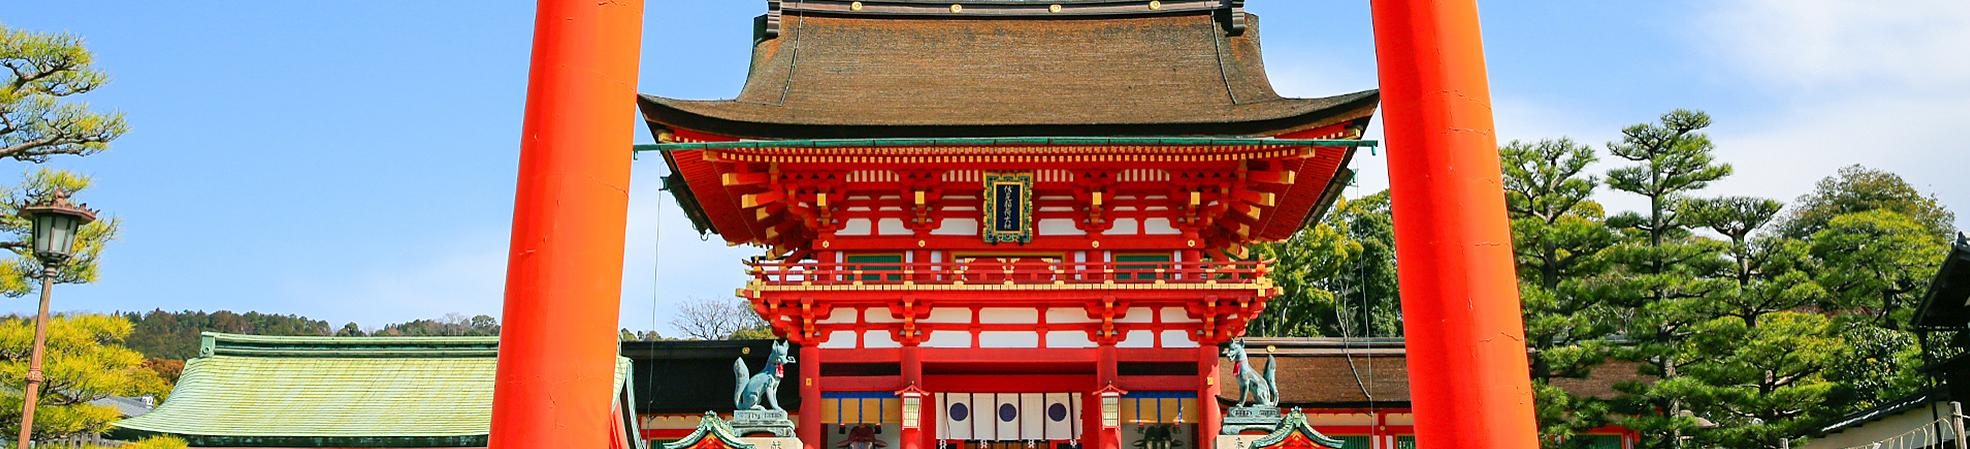 10 Tourist Attractions in Japan